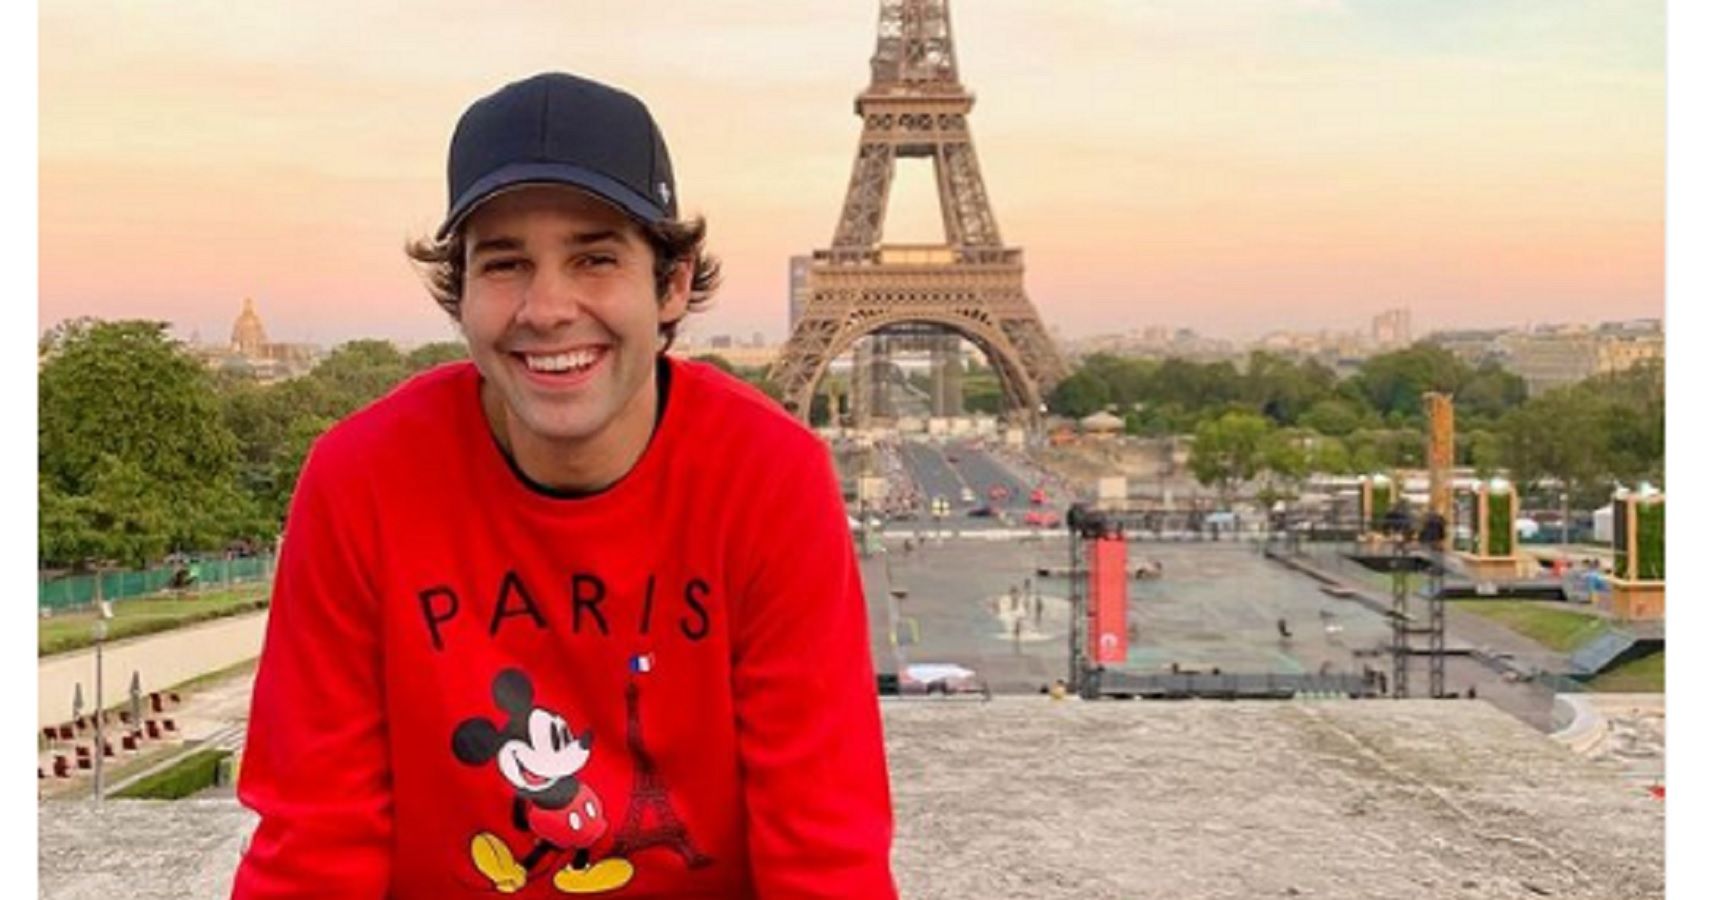 How David Dobrik Became One Of The Most Influential Social Media Stars